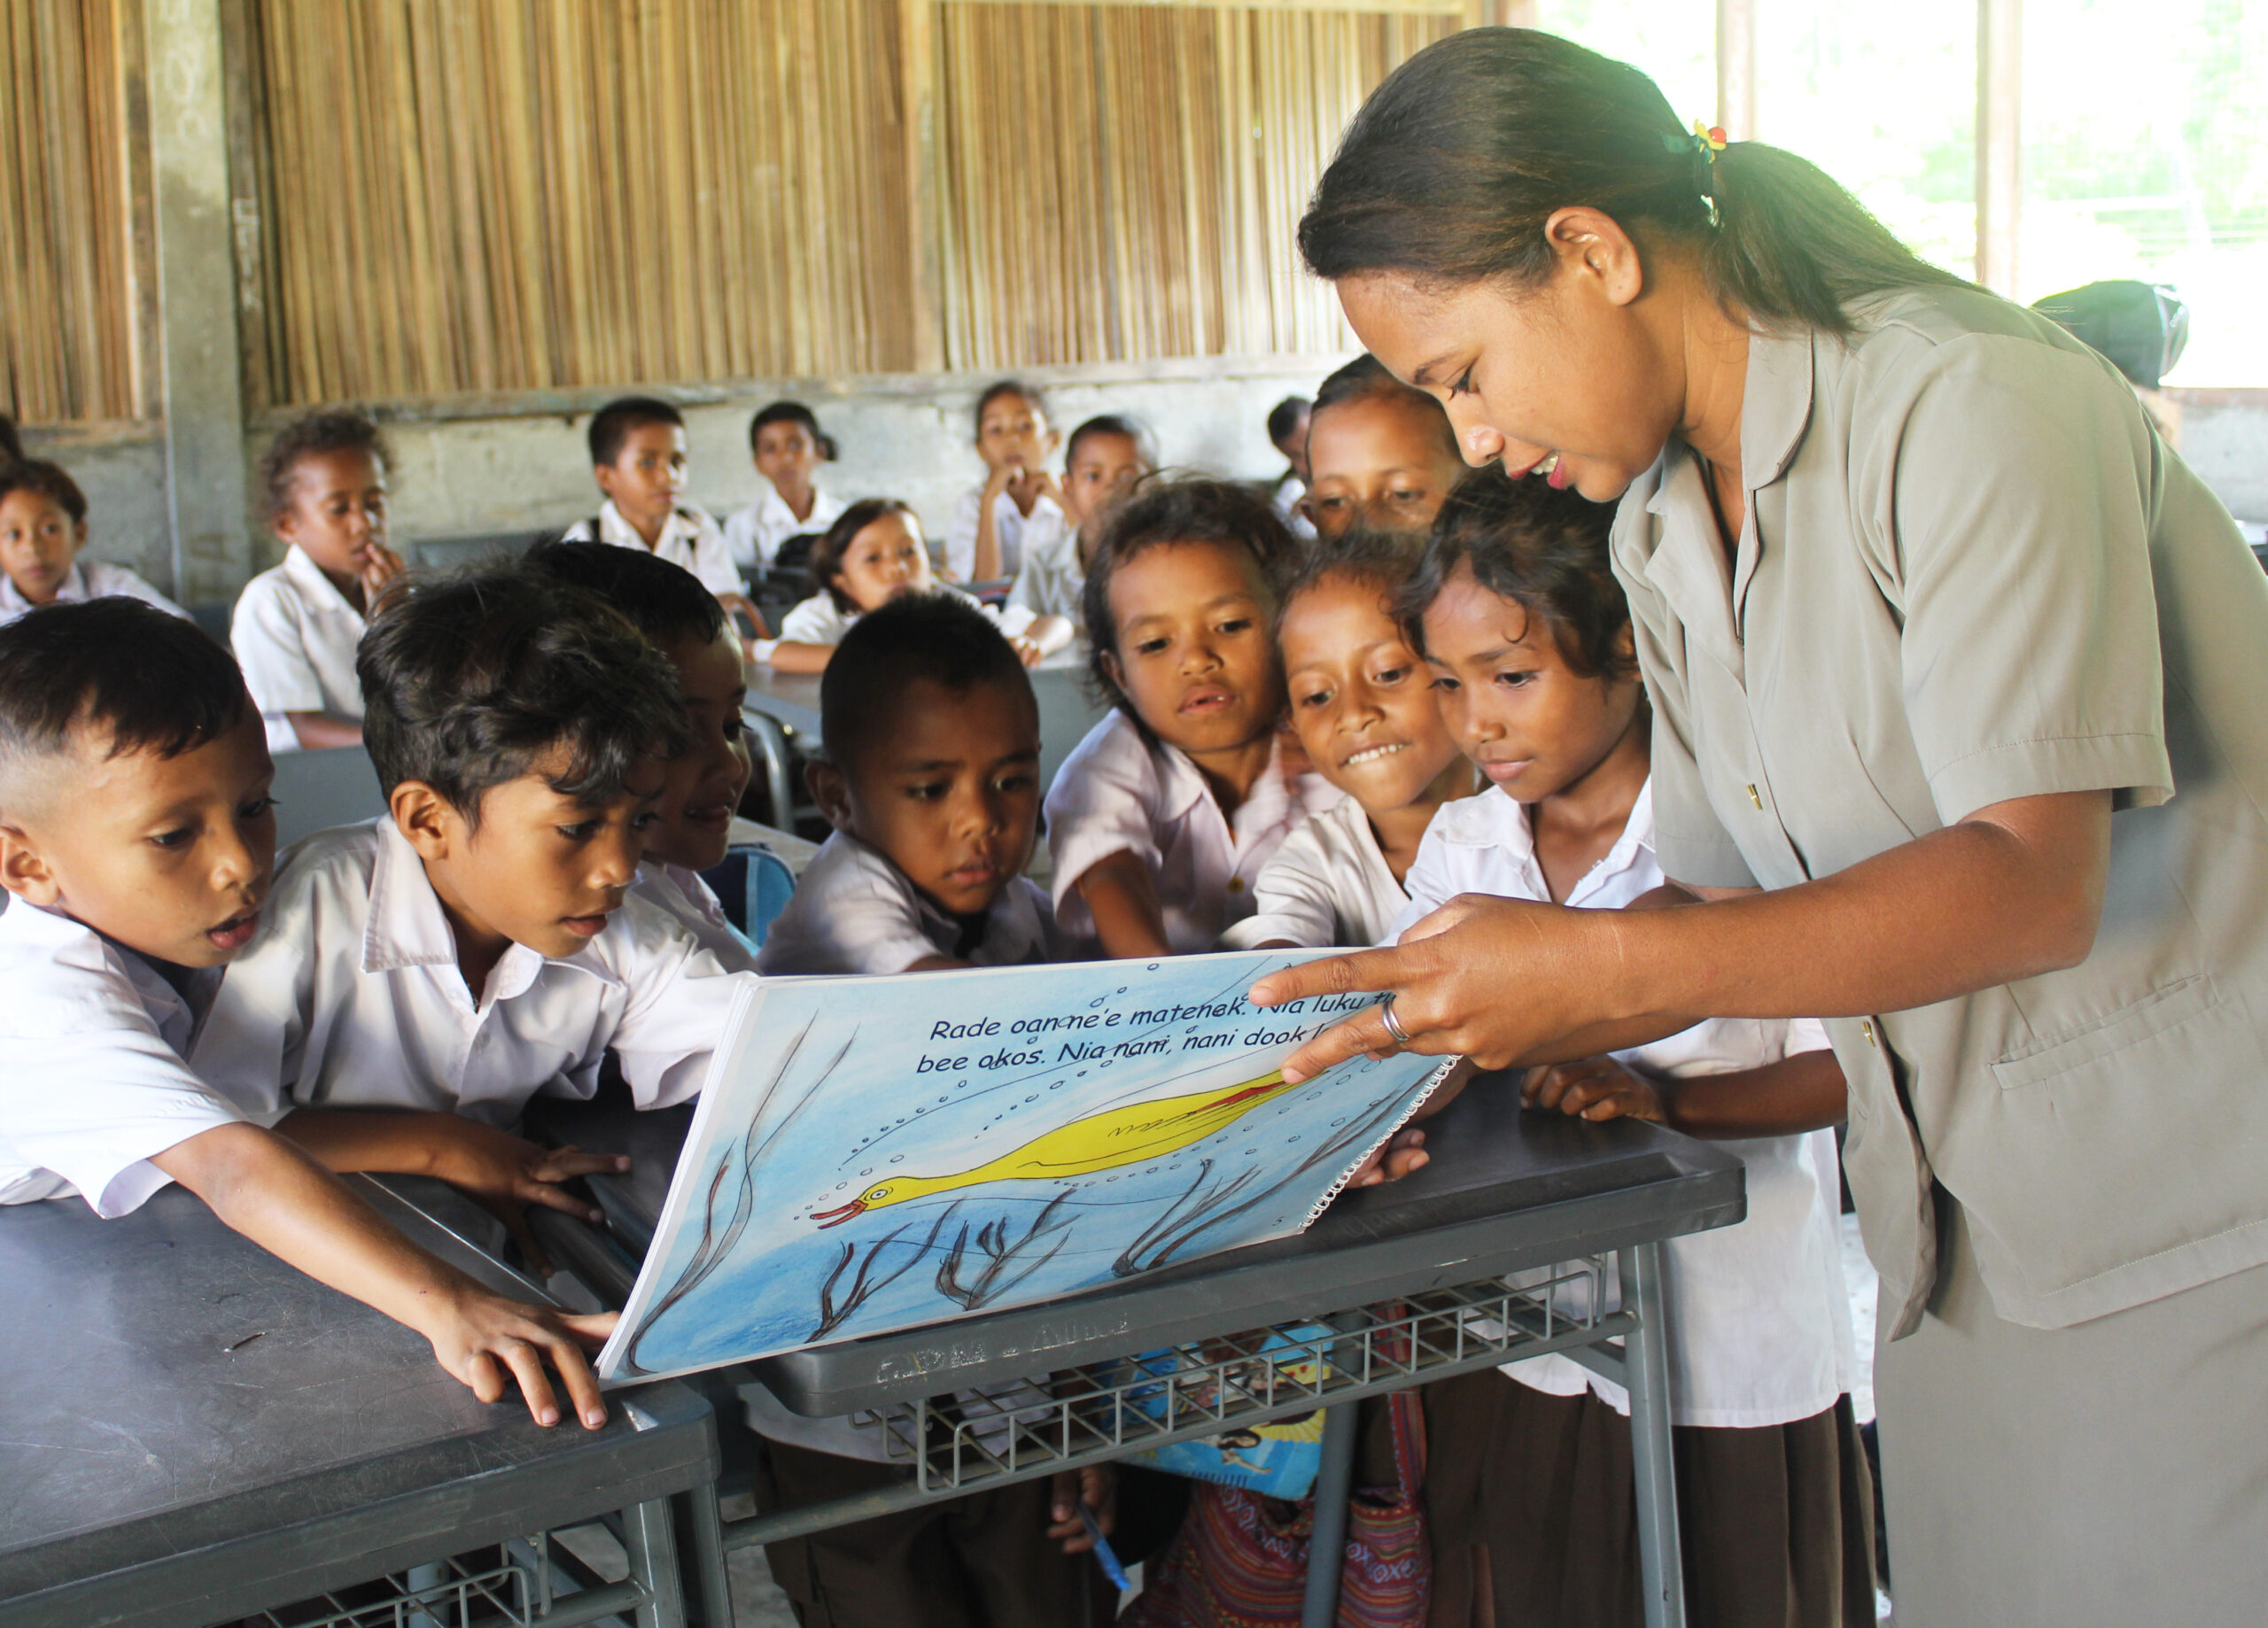 A teacher shows a book  to a group of small children in a classroom